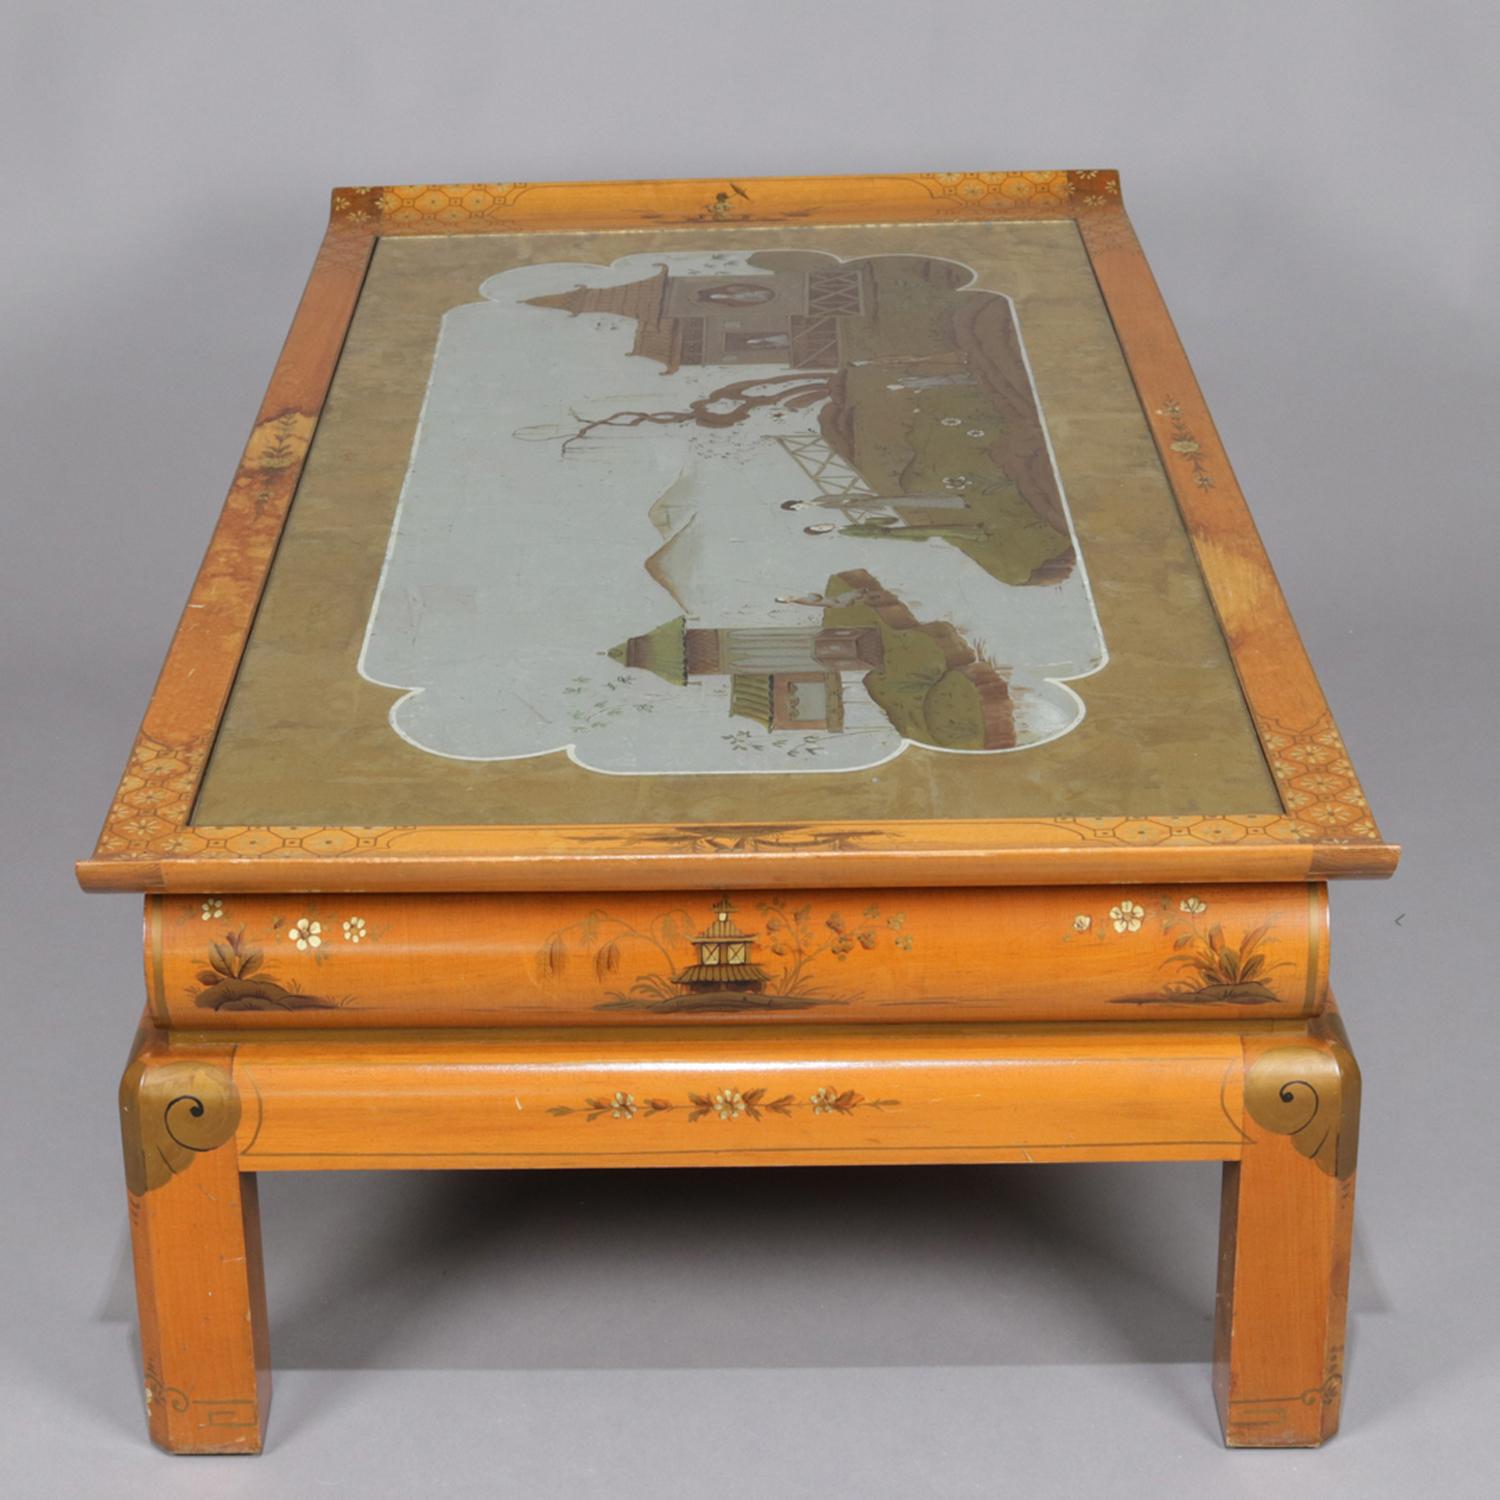 Oversized Hand-Painted and Gilt Pictorial Chinoiserie Coffee Table, circa 1940 For Sale 2